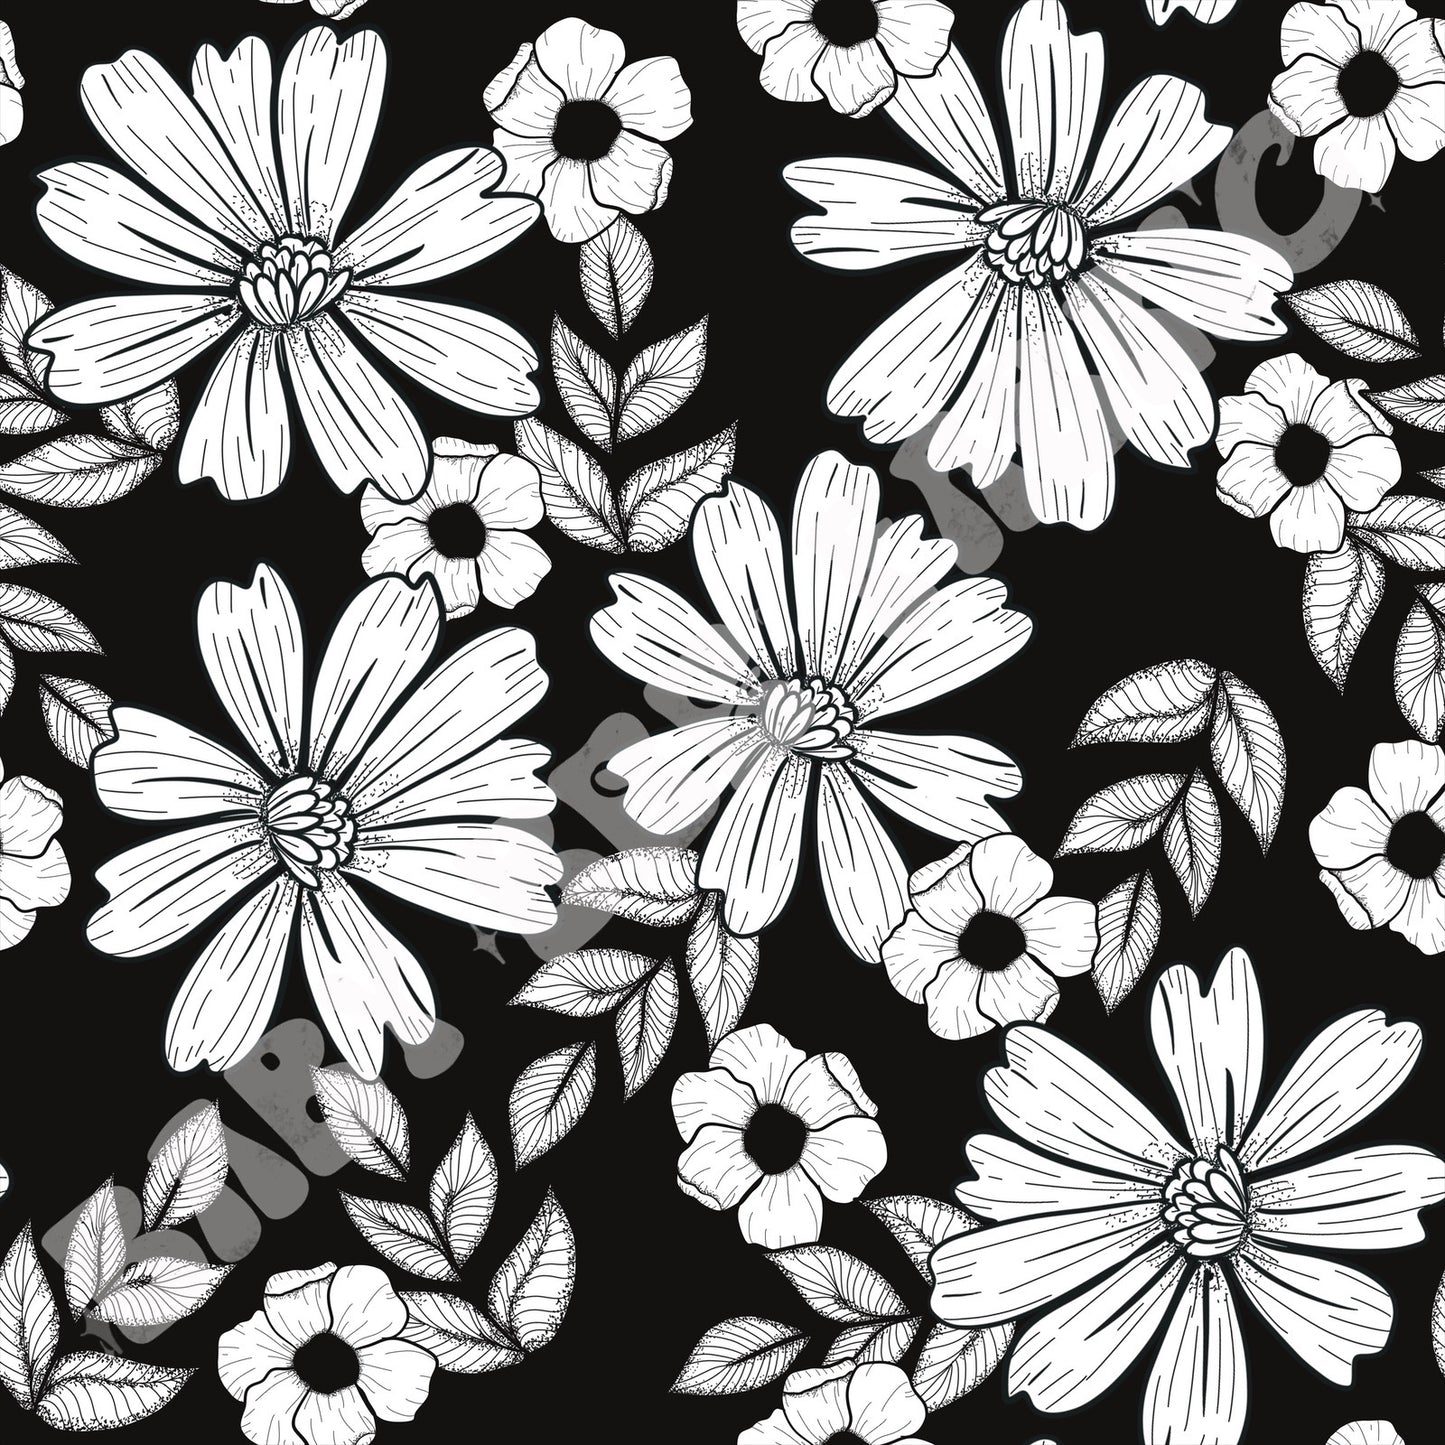 Black and White Floral